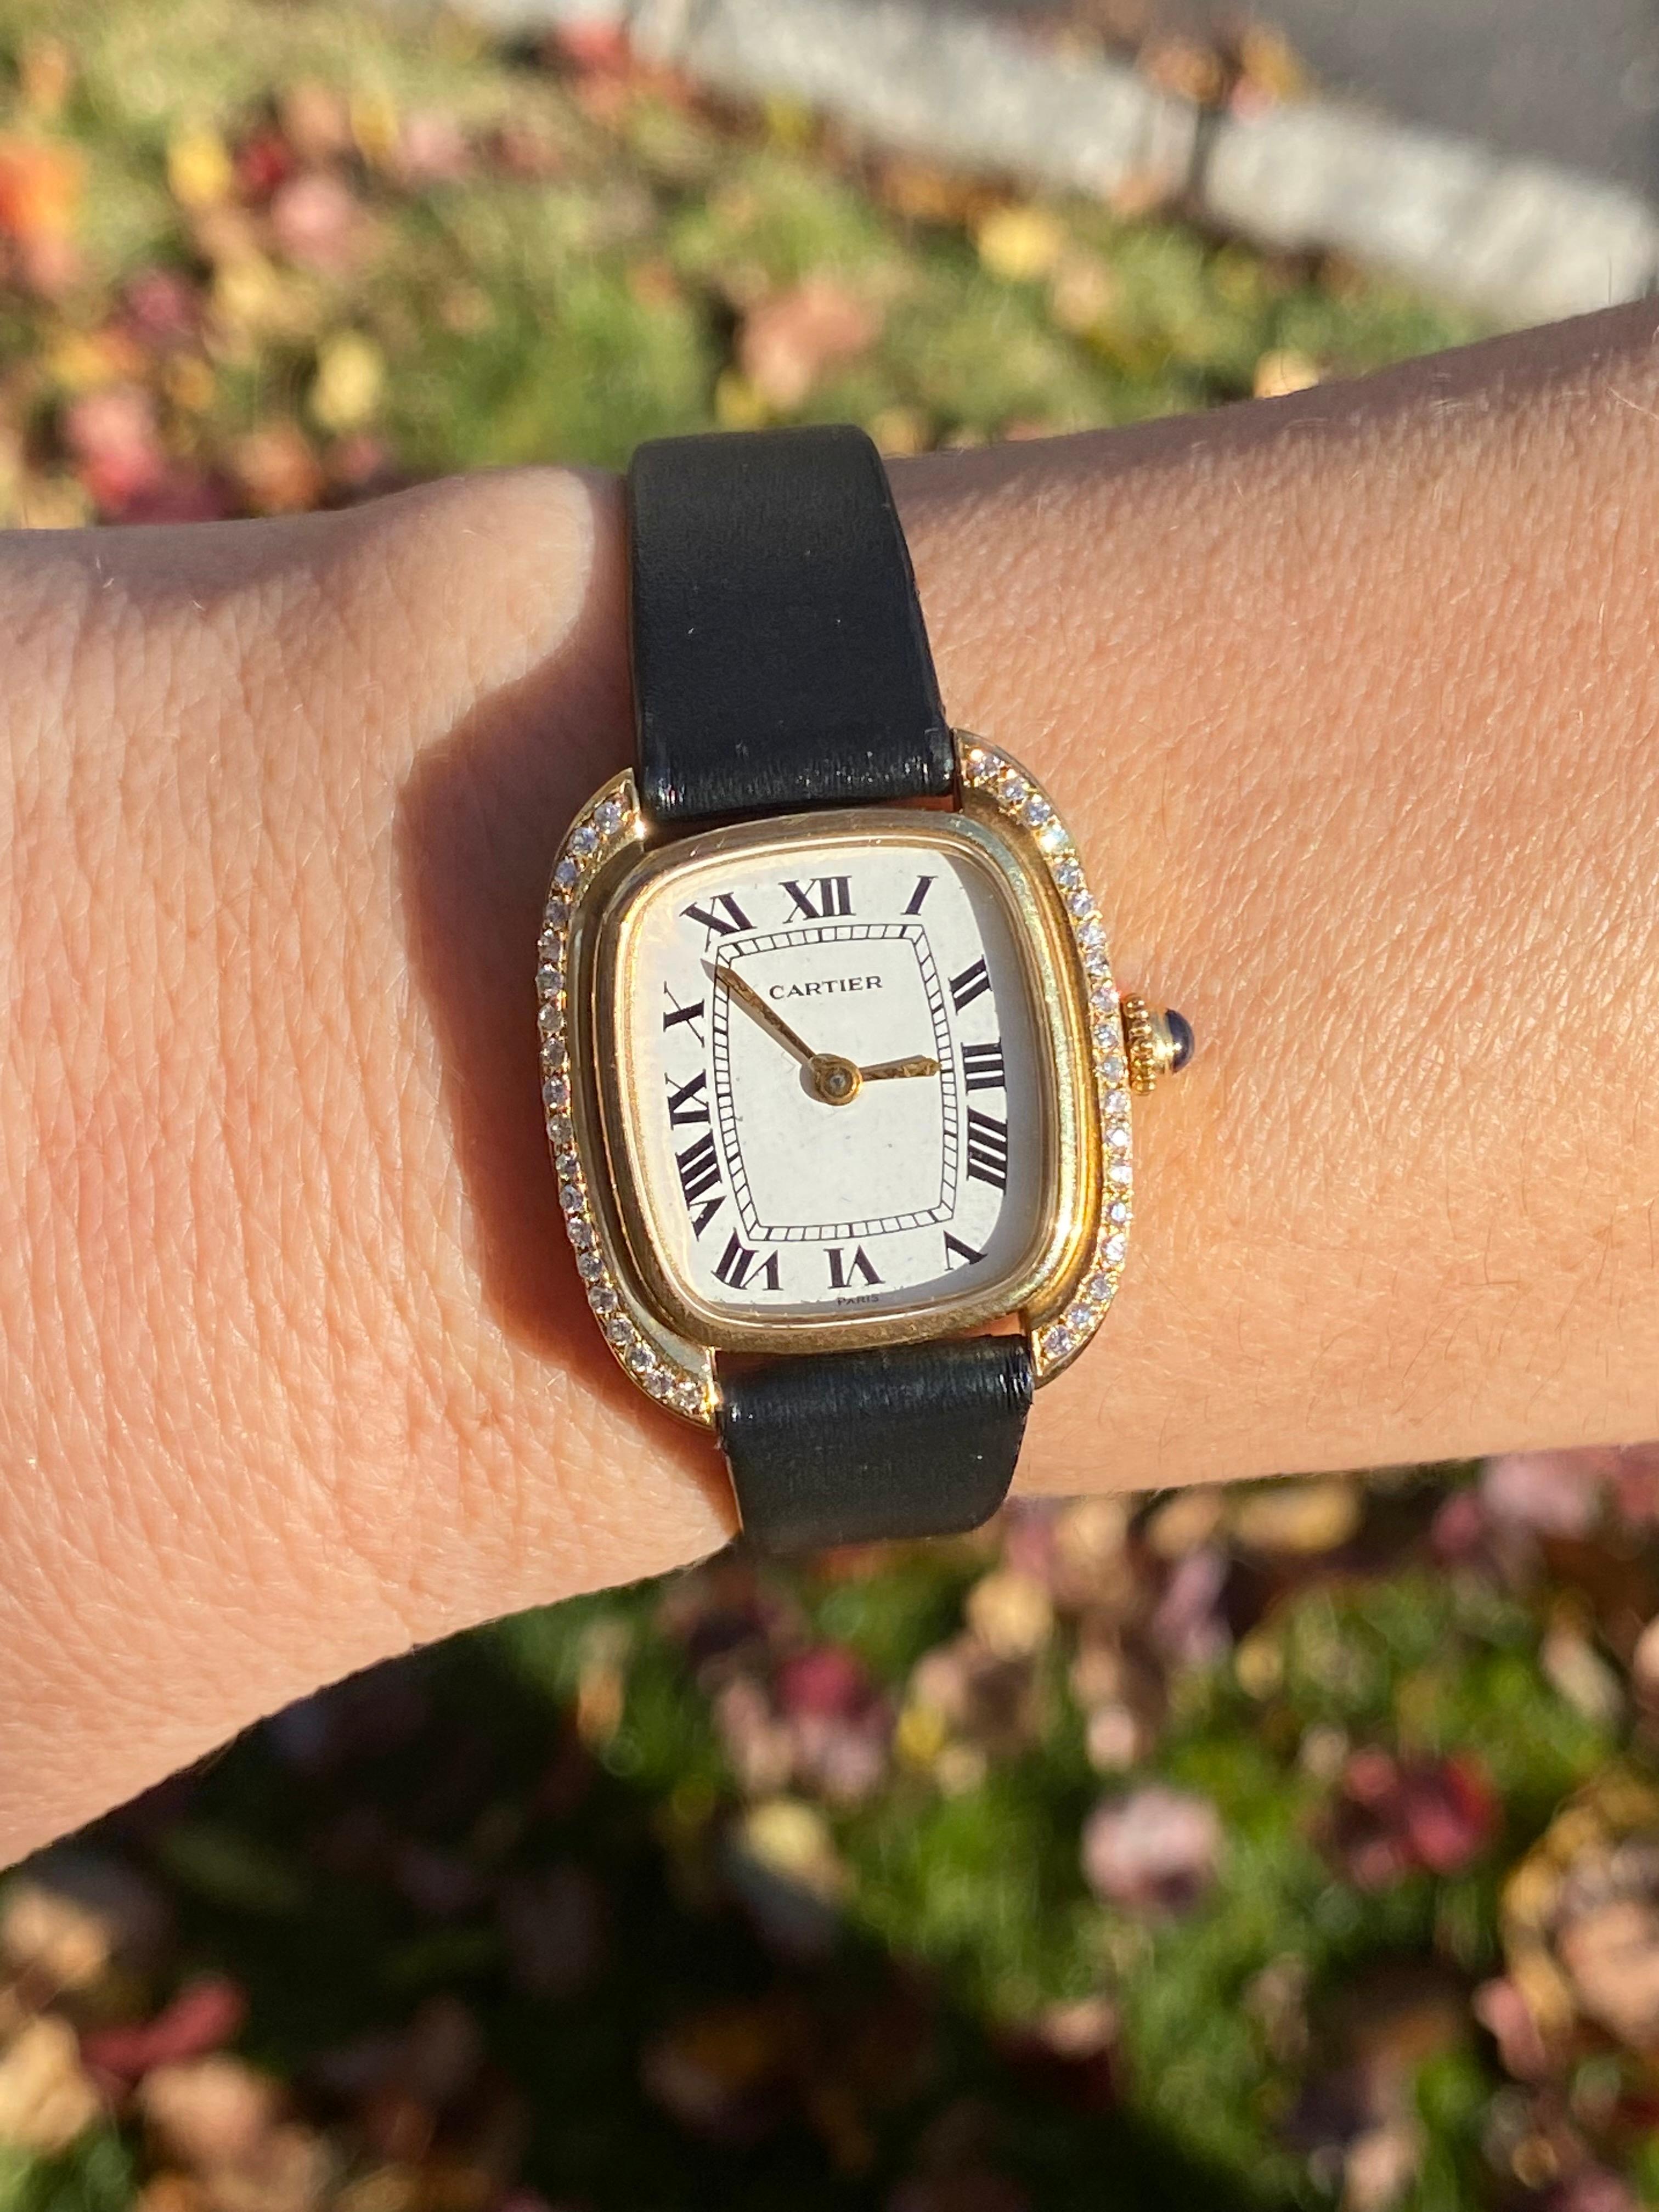 The oval-shaped case is decorated by a single outer row of round full cut diamonds, a white dial with black Roman numerals, gold hands, manual movement, genuine leather replacement strap, and complete with a cabochon cut sapphire crown. The back